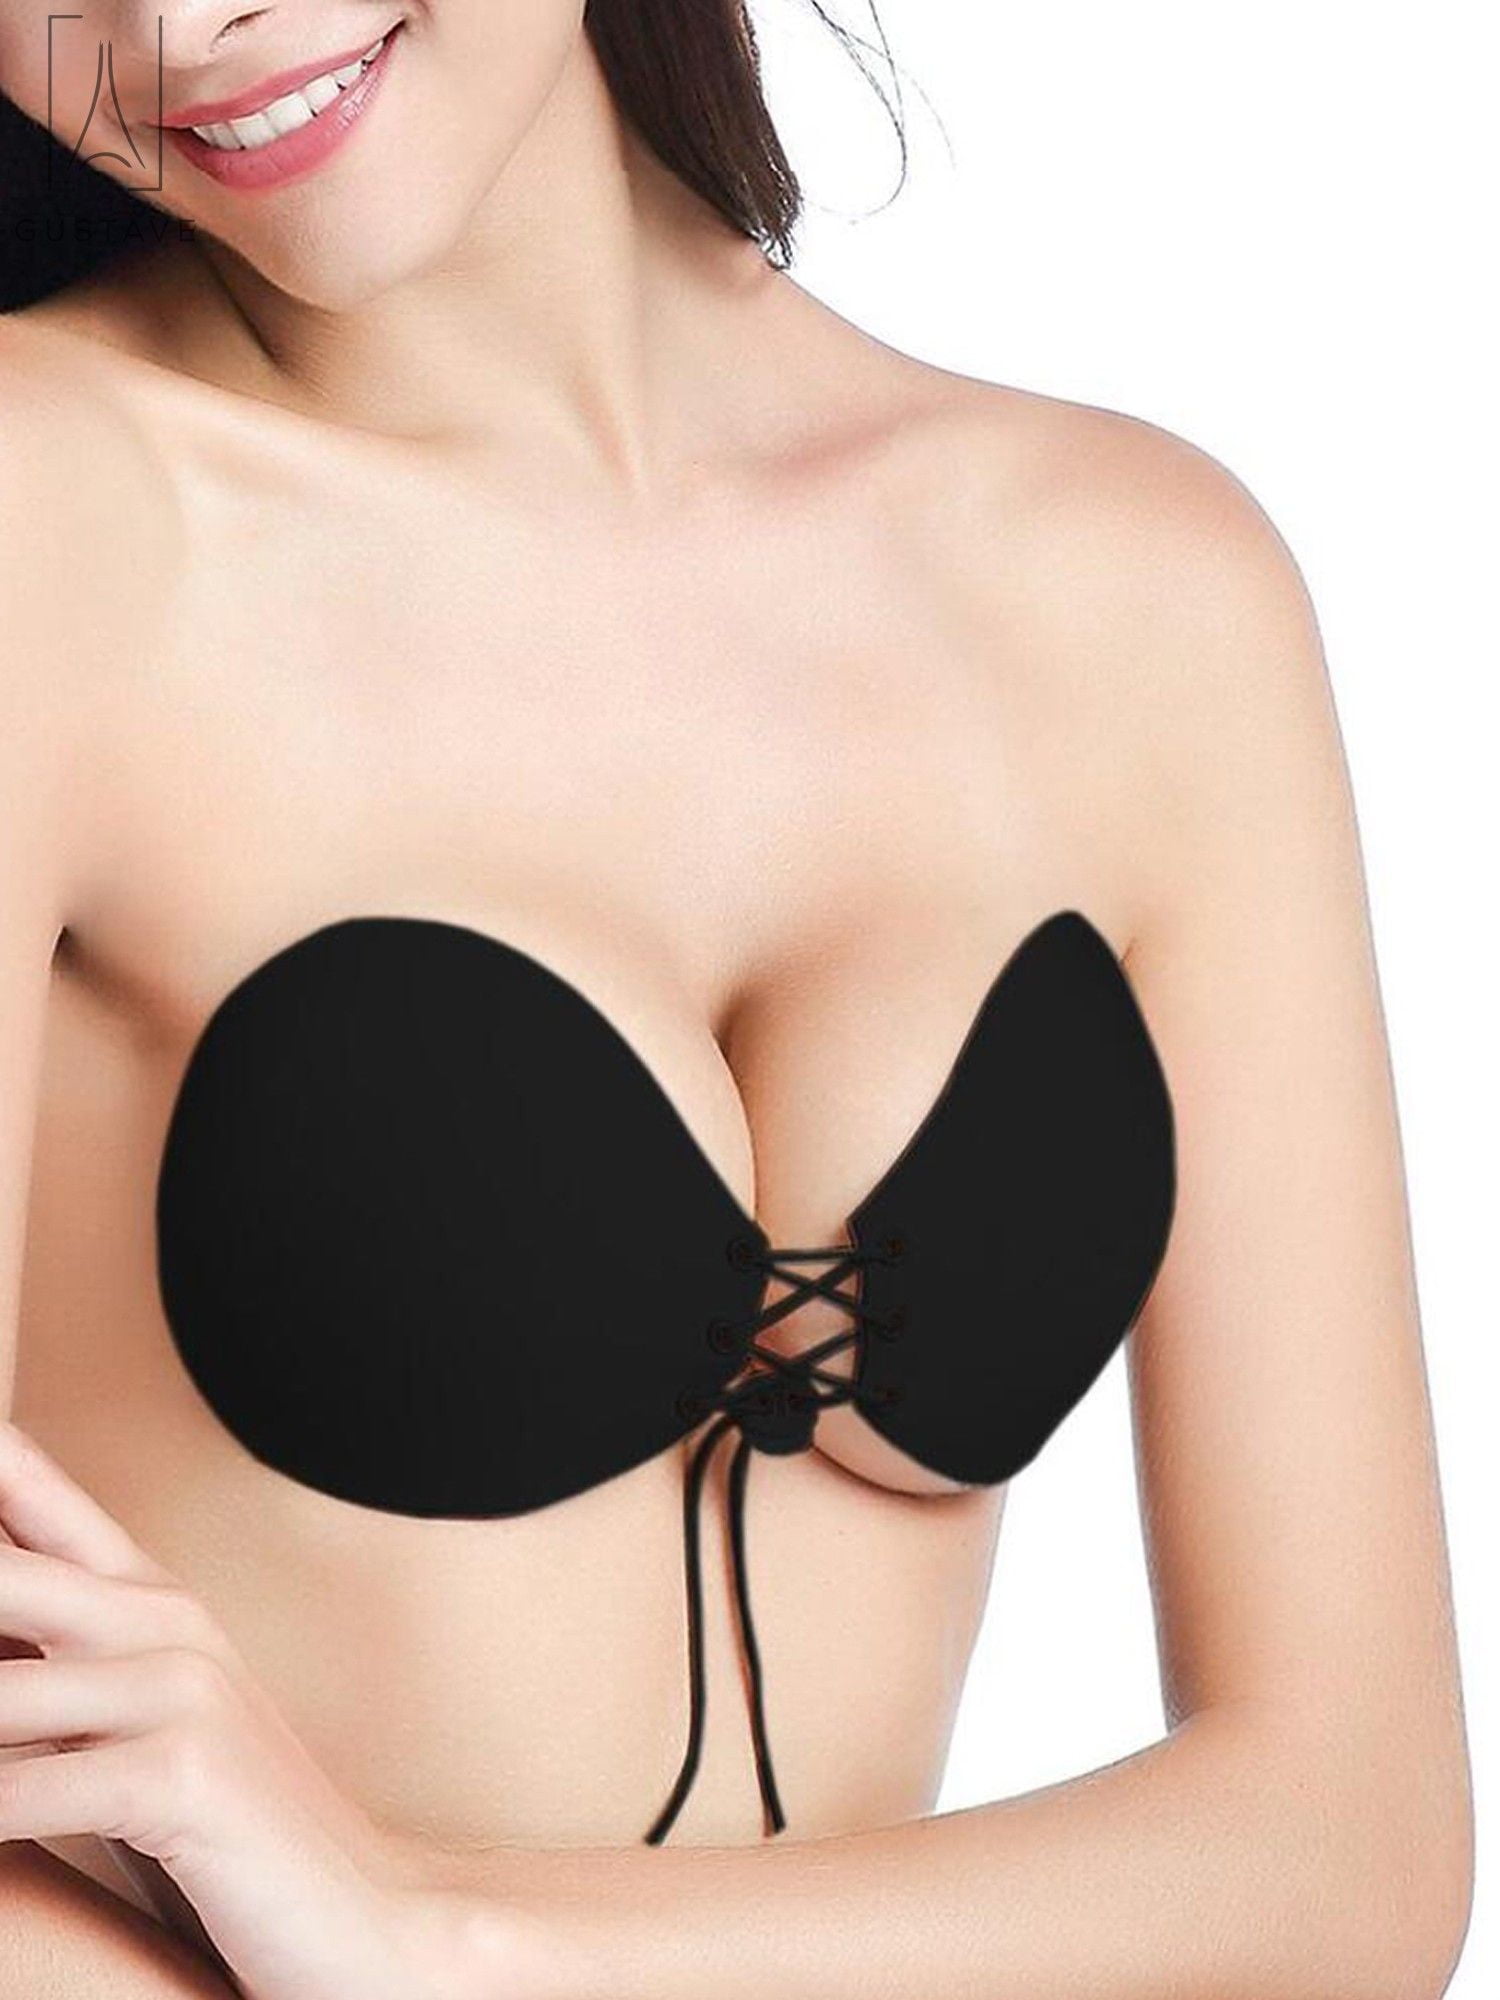 Gustavedesign Self Adhesive Bra Strapless Sticky Invisible Push up Silicone Bra for Backless Dress with Drawstring Suit B Cup Black 4a1a6923 f034 4500 82d7 8ecd8f12148d.9beba1132b3c6fdc33130394f4f7465b